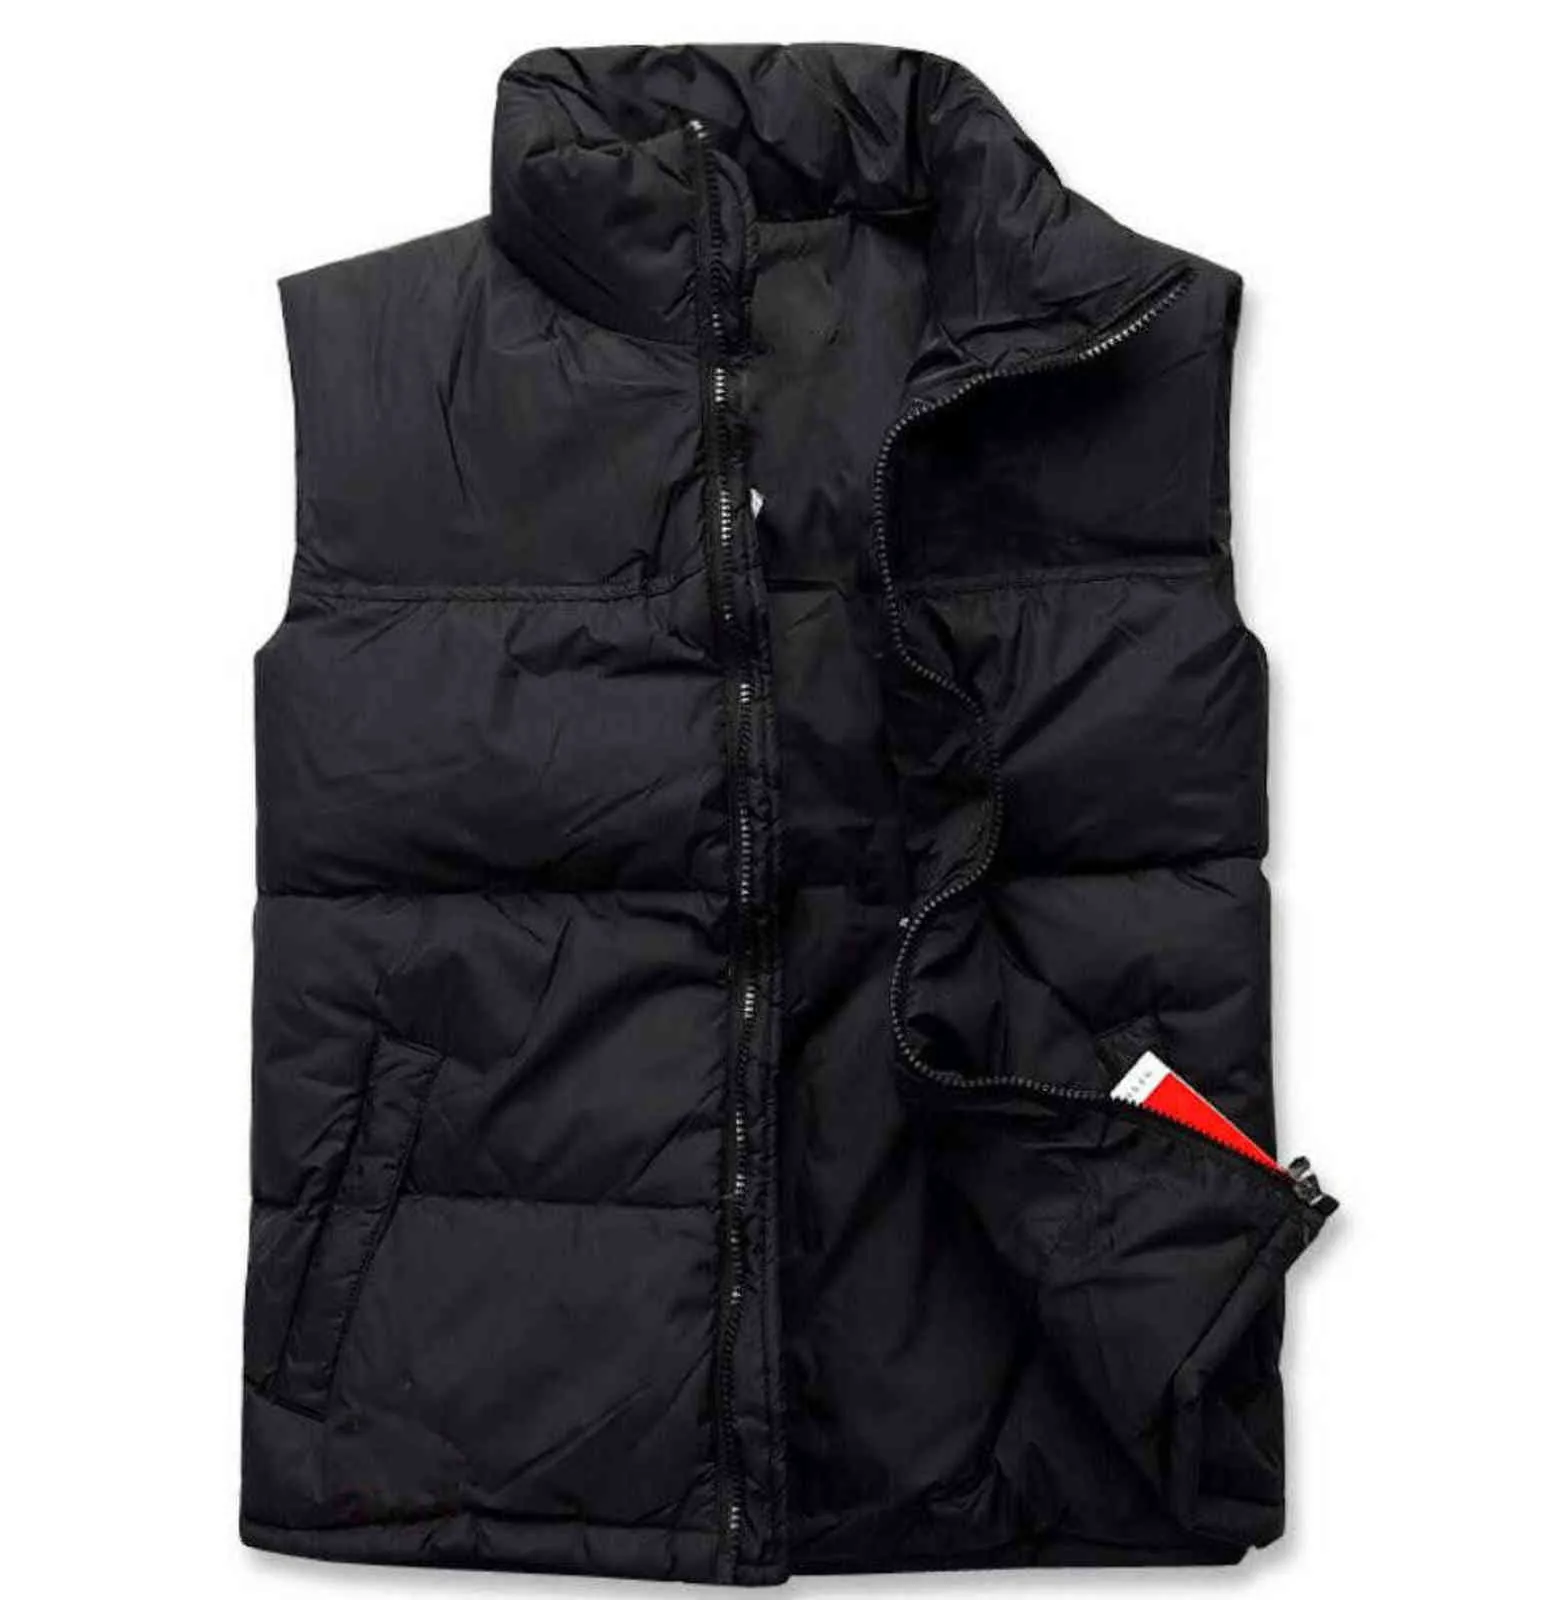 Mens Down Vest Men Winter Jacket Puffer Coat High Quality Sleeveless Waistcoat Casual Vests Size Men's Clothes S-XXL Y1103